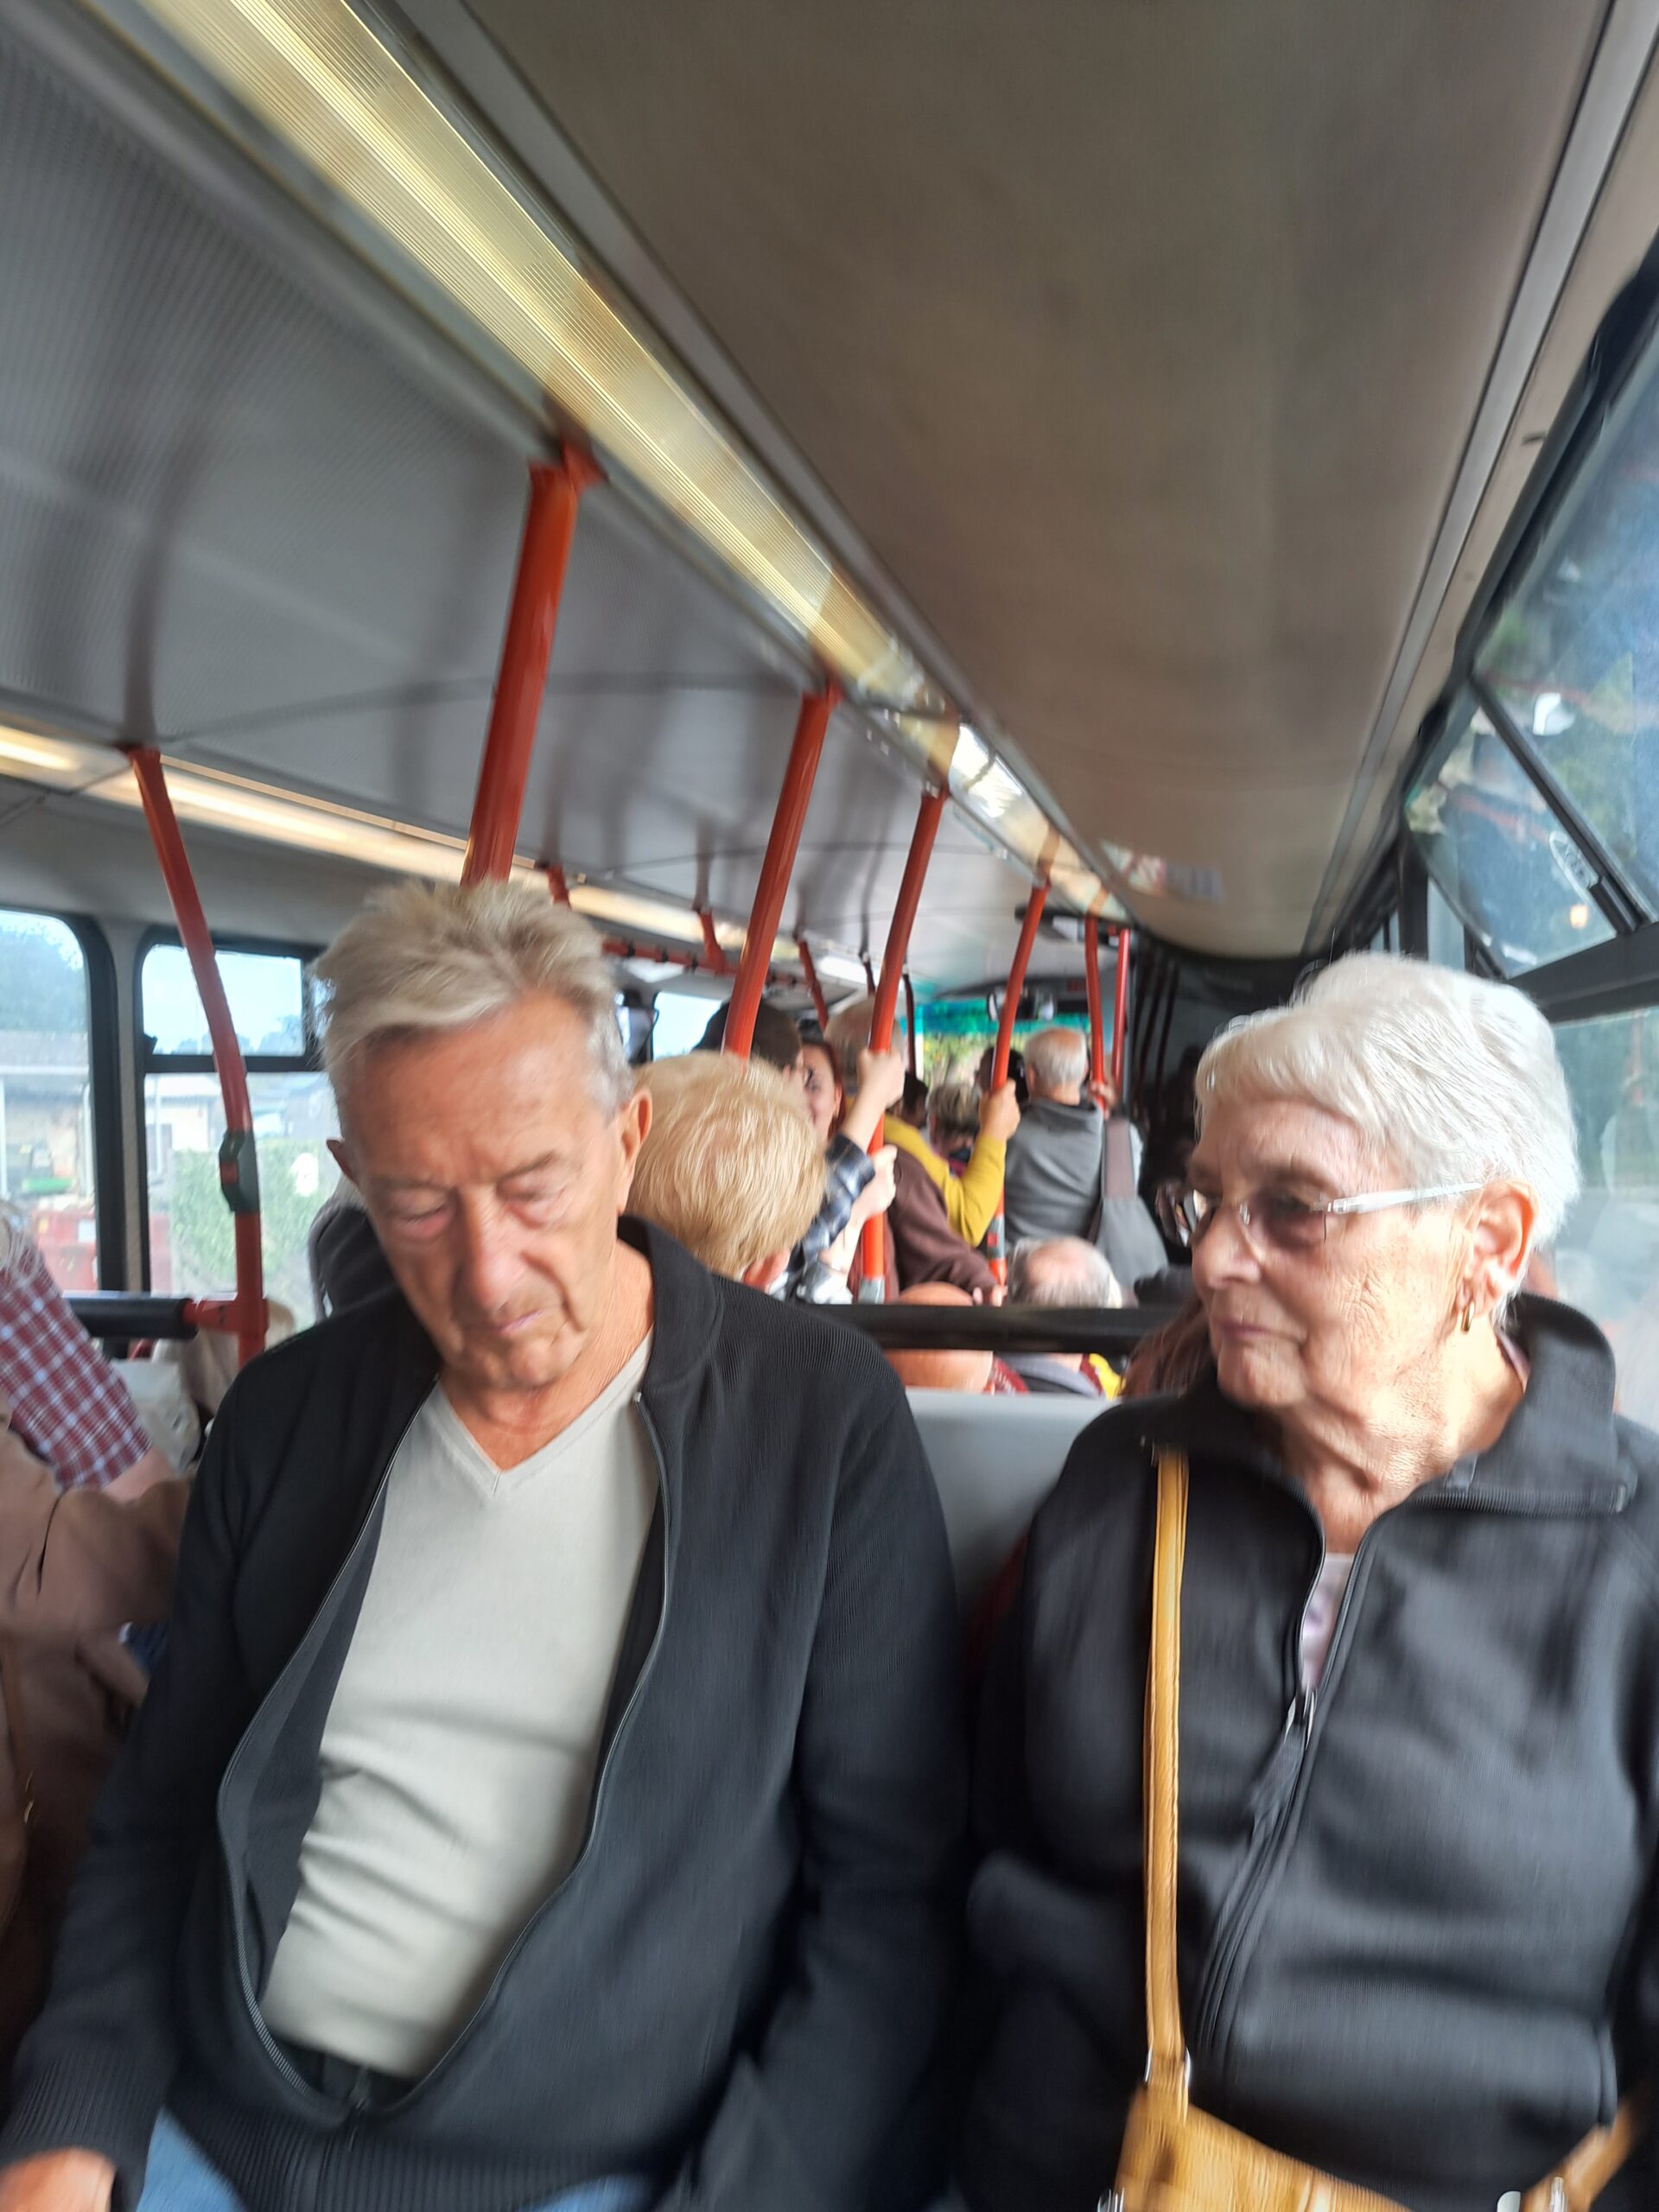 Bus is full with loads of passengers